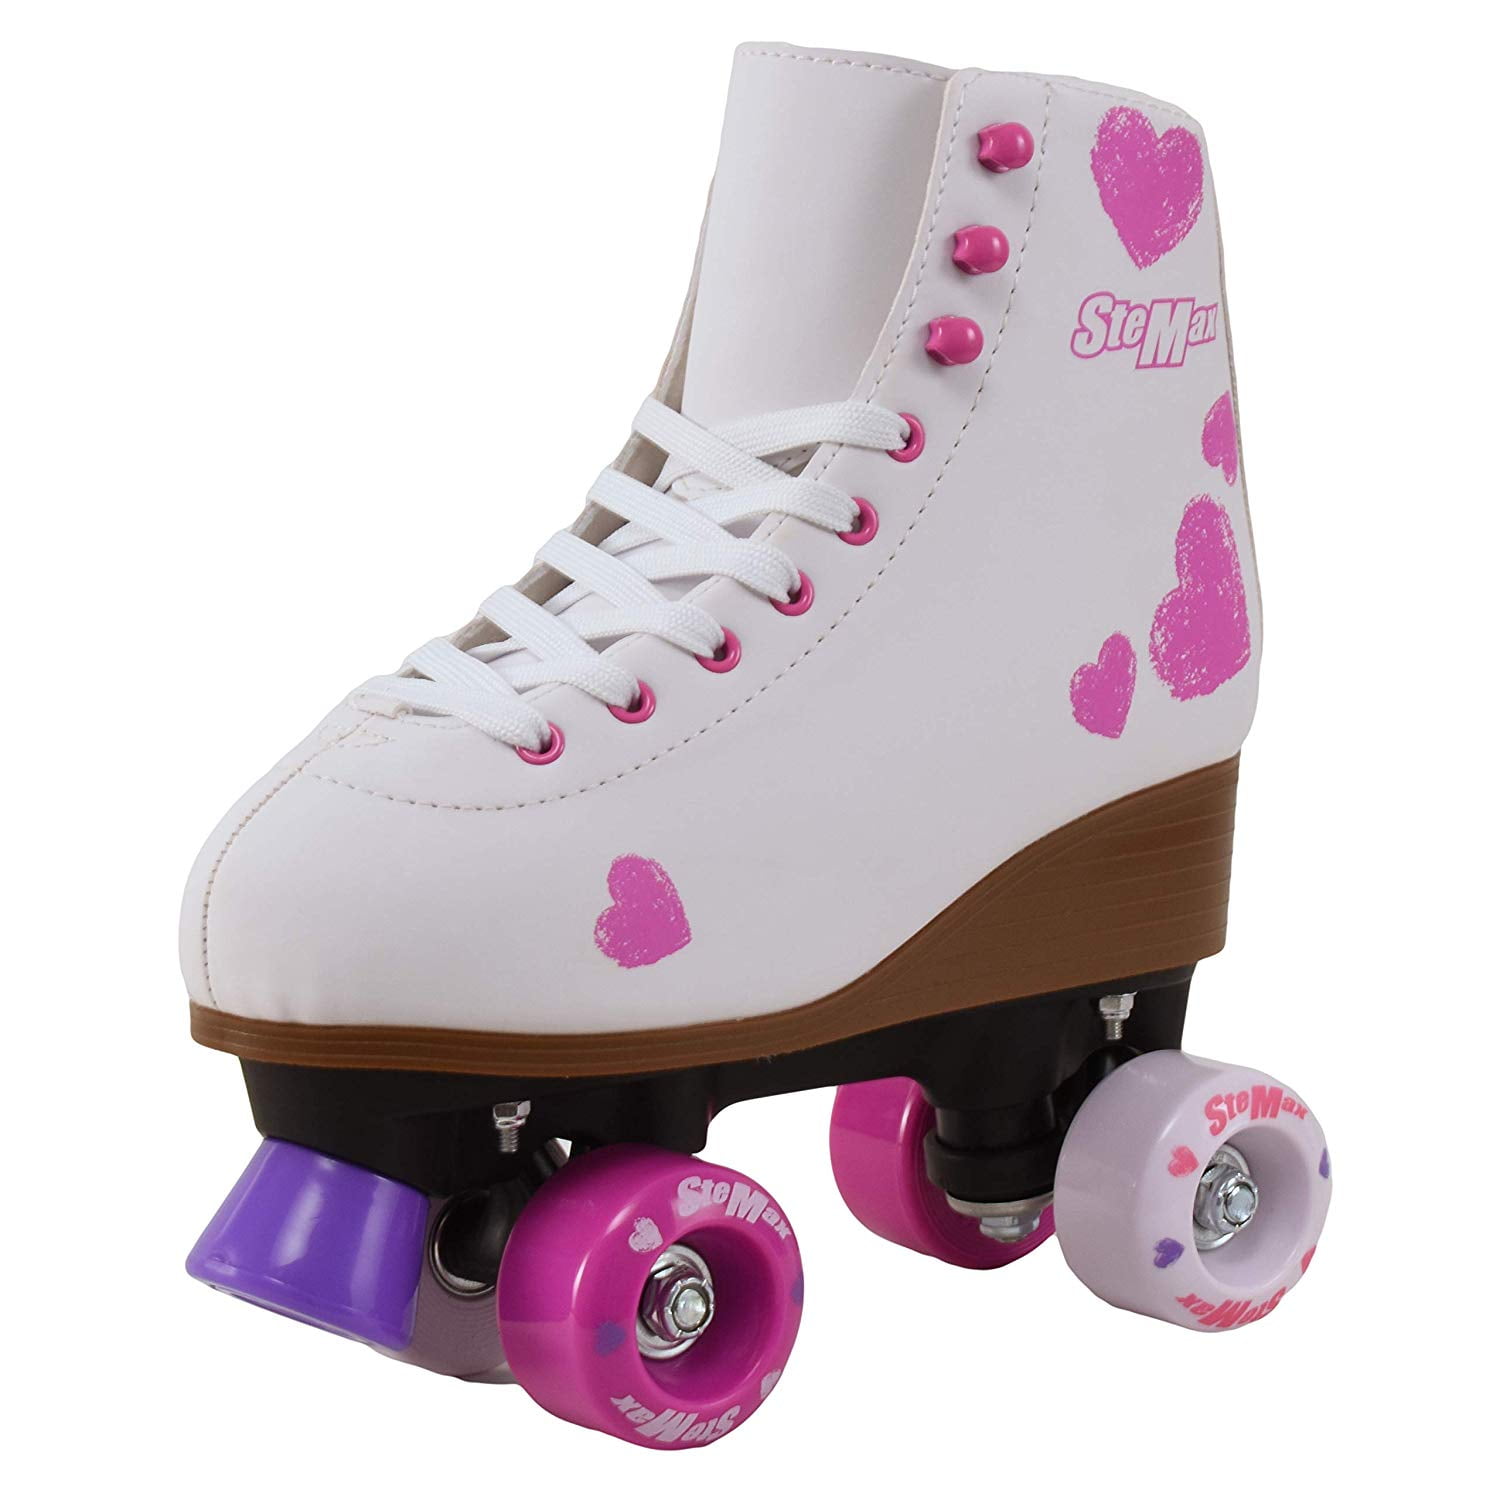 Classic Quad Roller Skates Light Up Wheels High-Top Shoes Design Faux Leather Double Row Roller Skates Color : Pink, Size : US/8 Womens Skates 